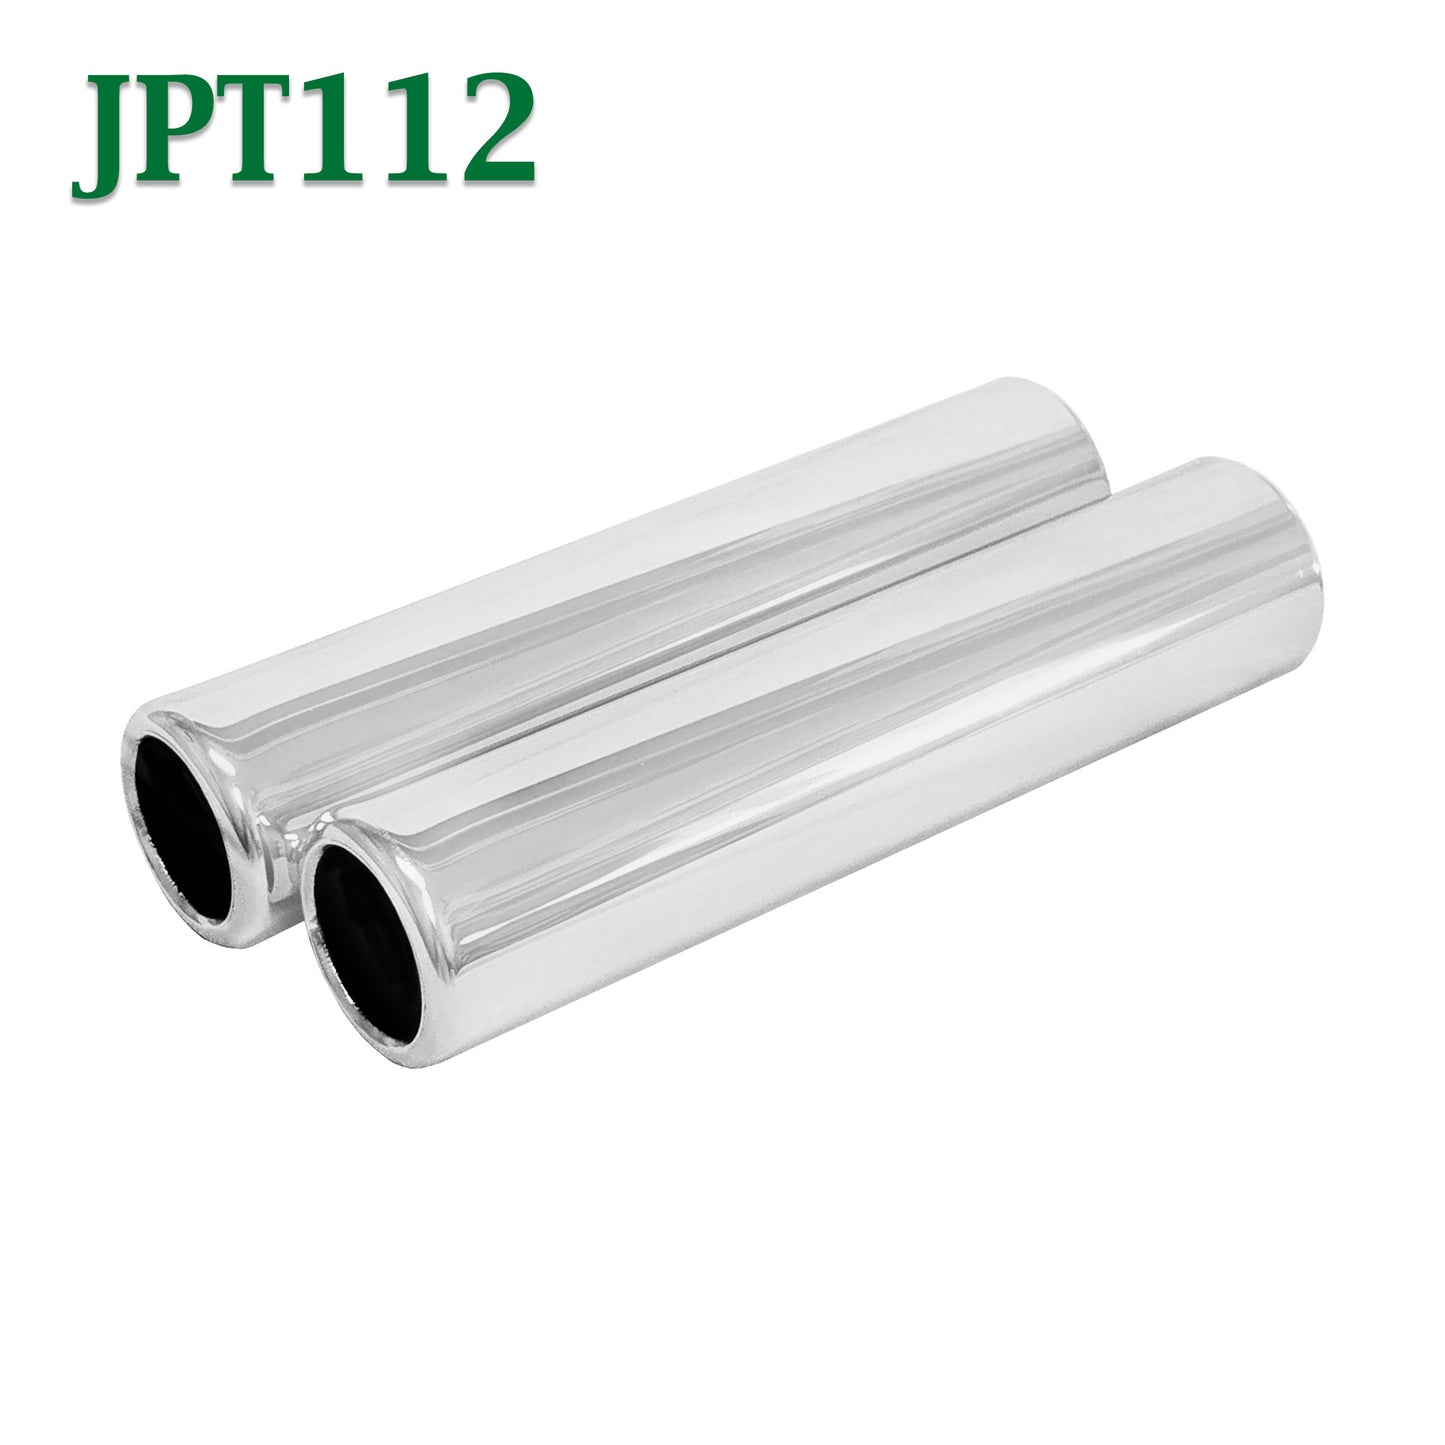 JPT112 1.5" Chrome Round Pencil Exhaust Tip 1 1/2" Inlet / 1 3/4" Outlet 8" Long